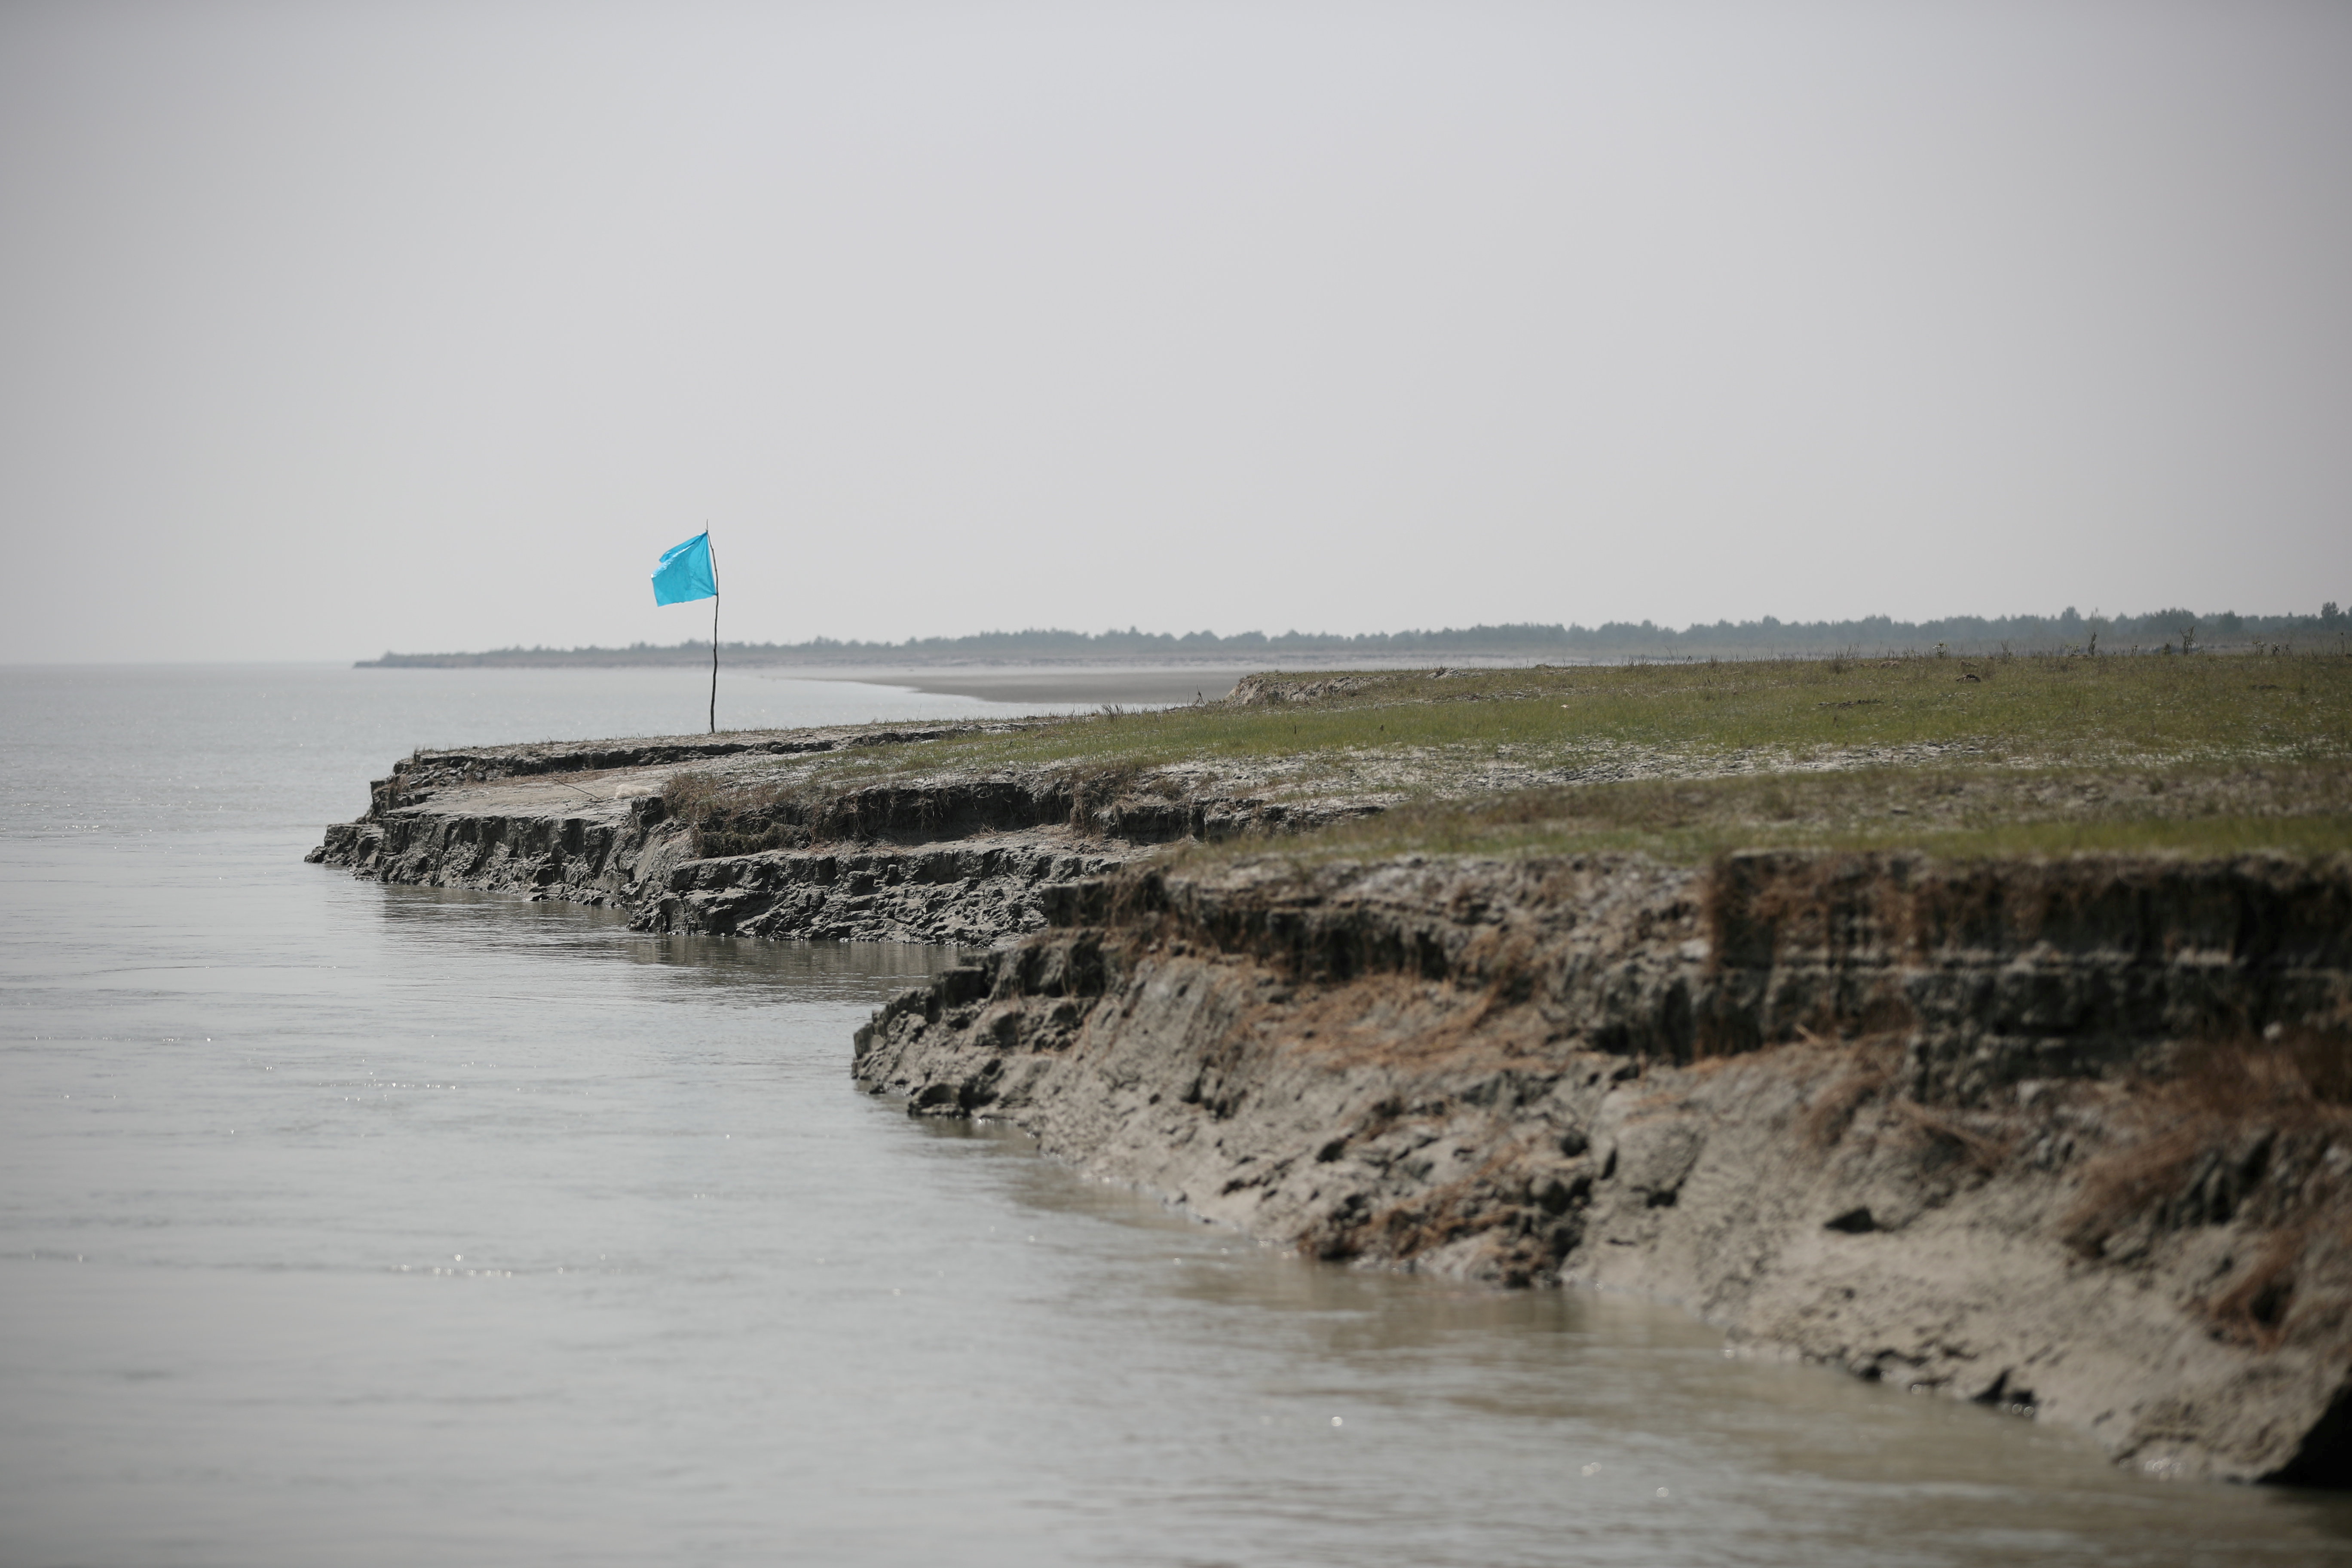 View of the island of Bhasan Char in the Bay of Bengal